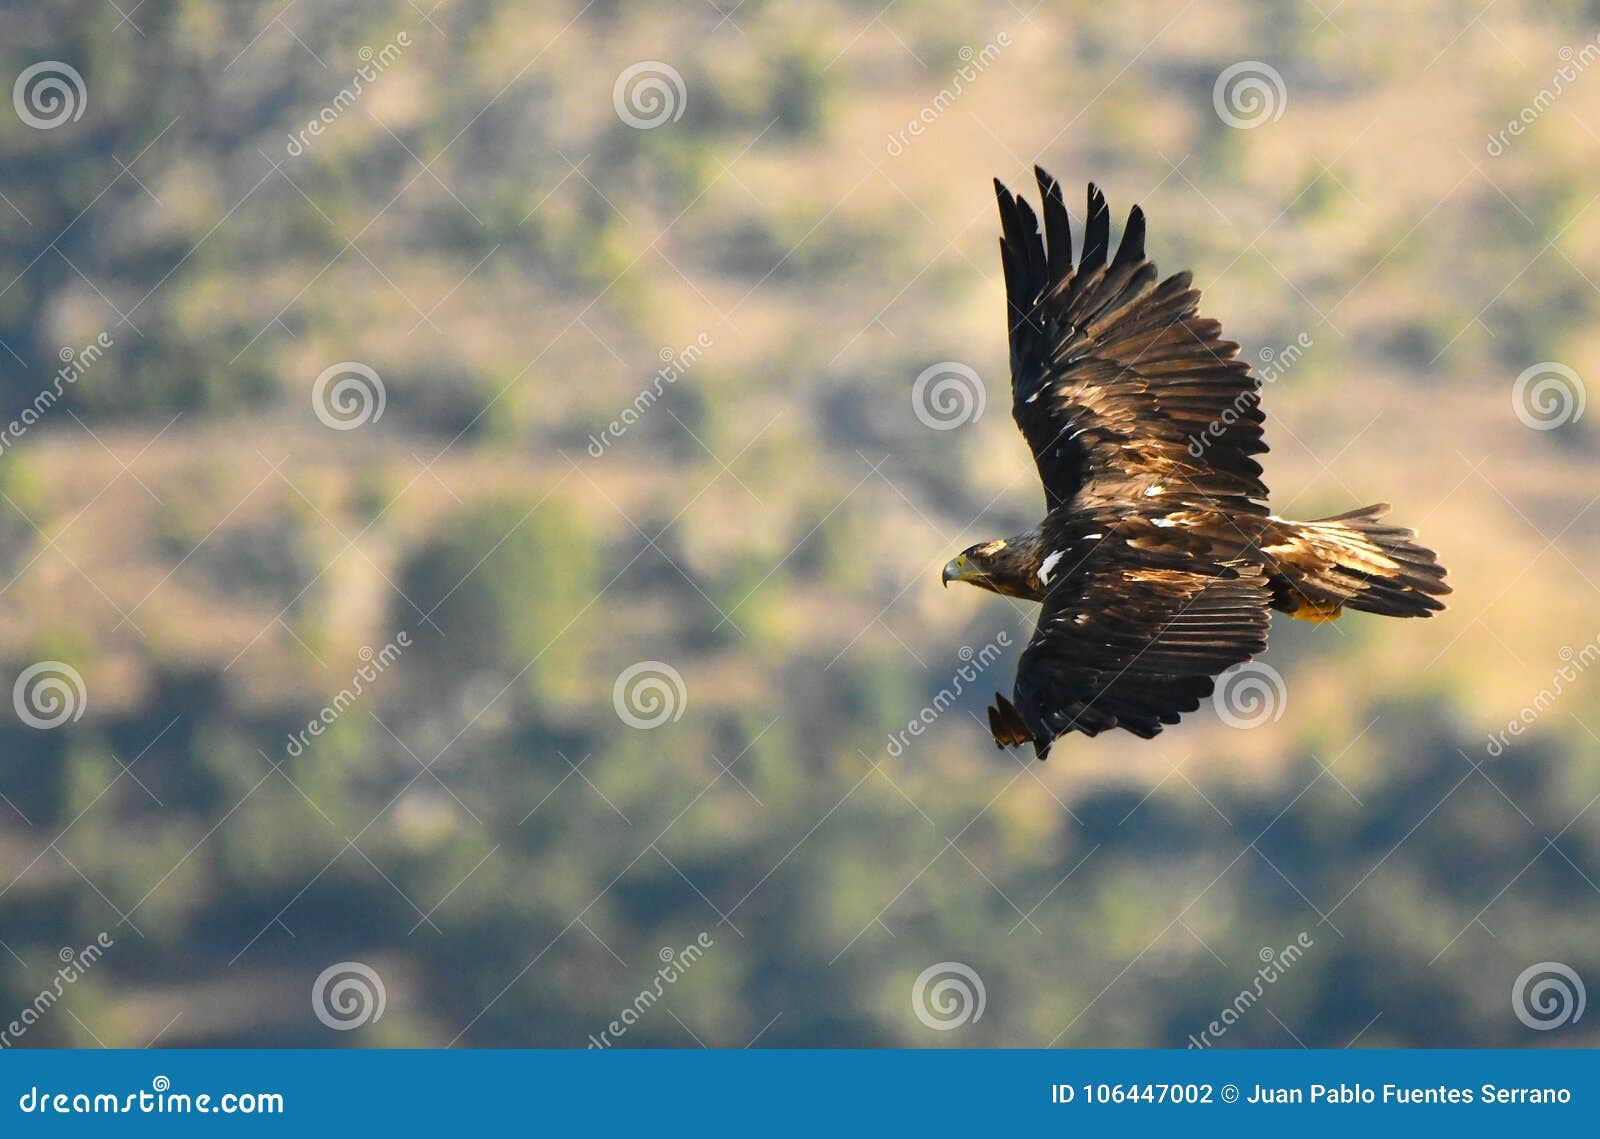 imperial eagle over flies its territory